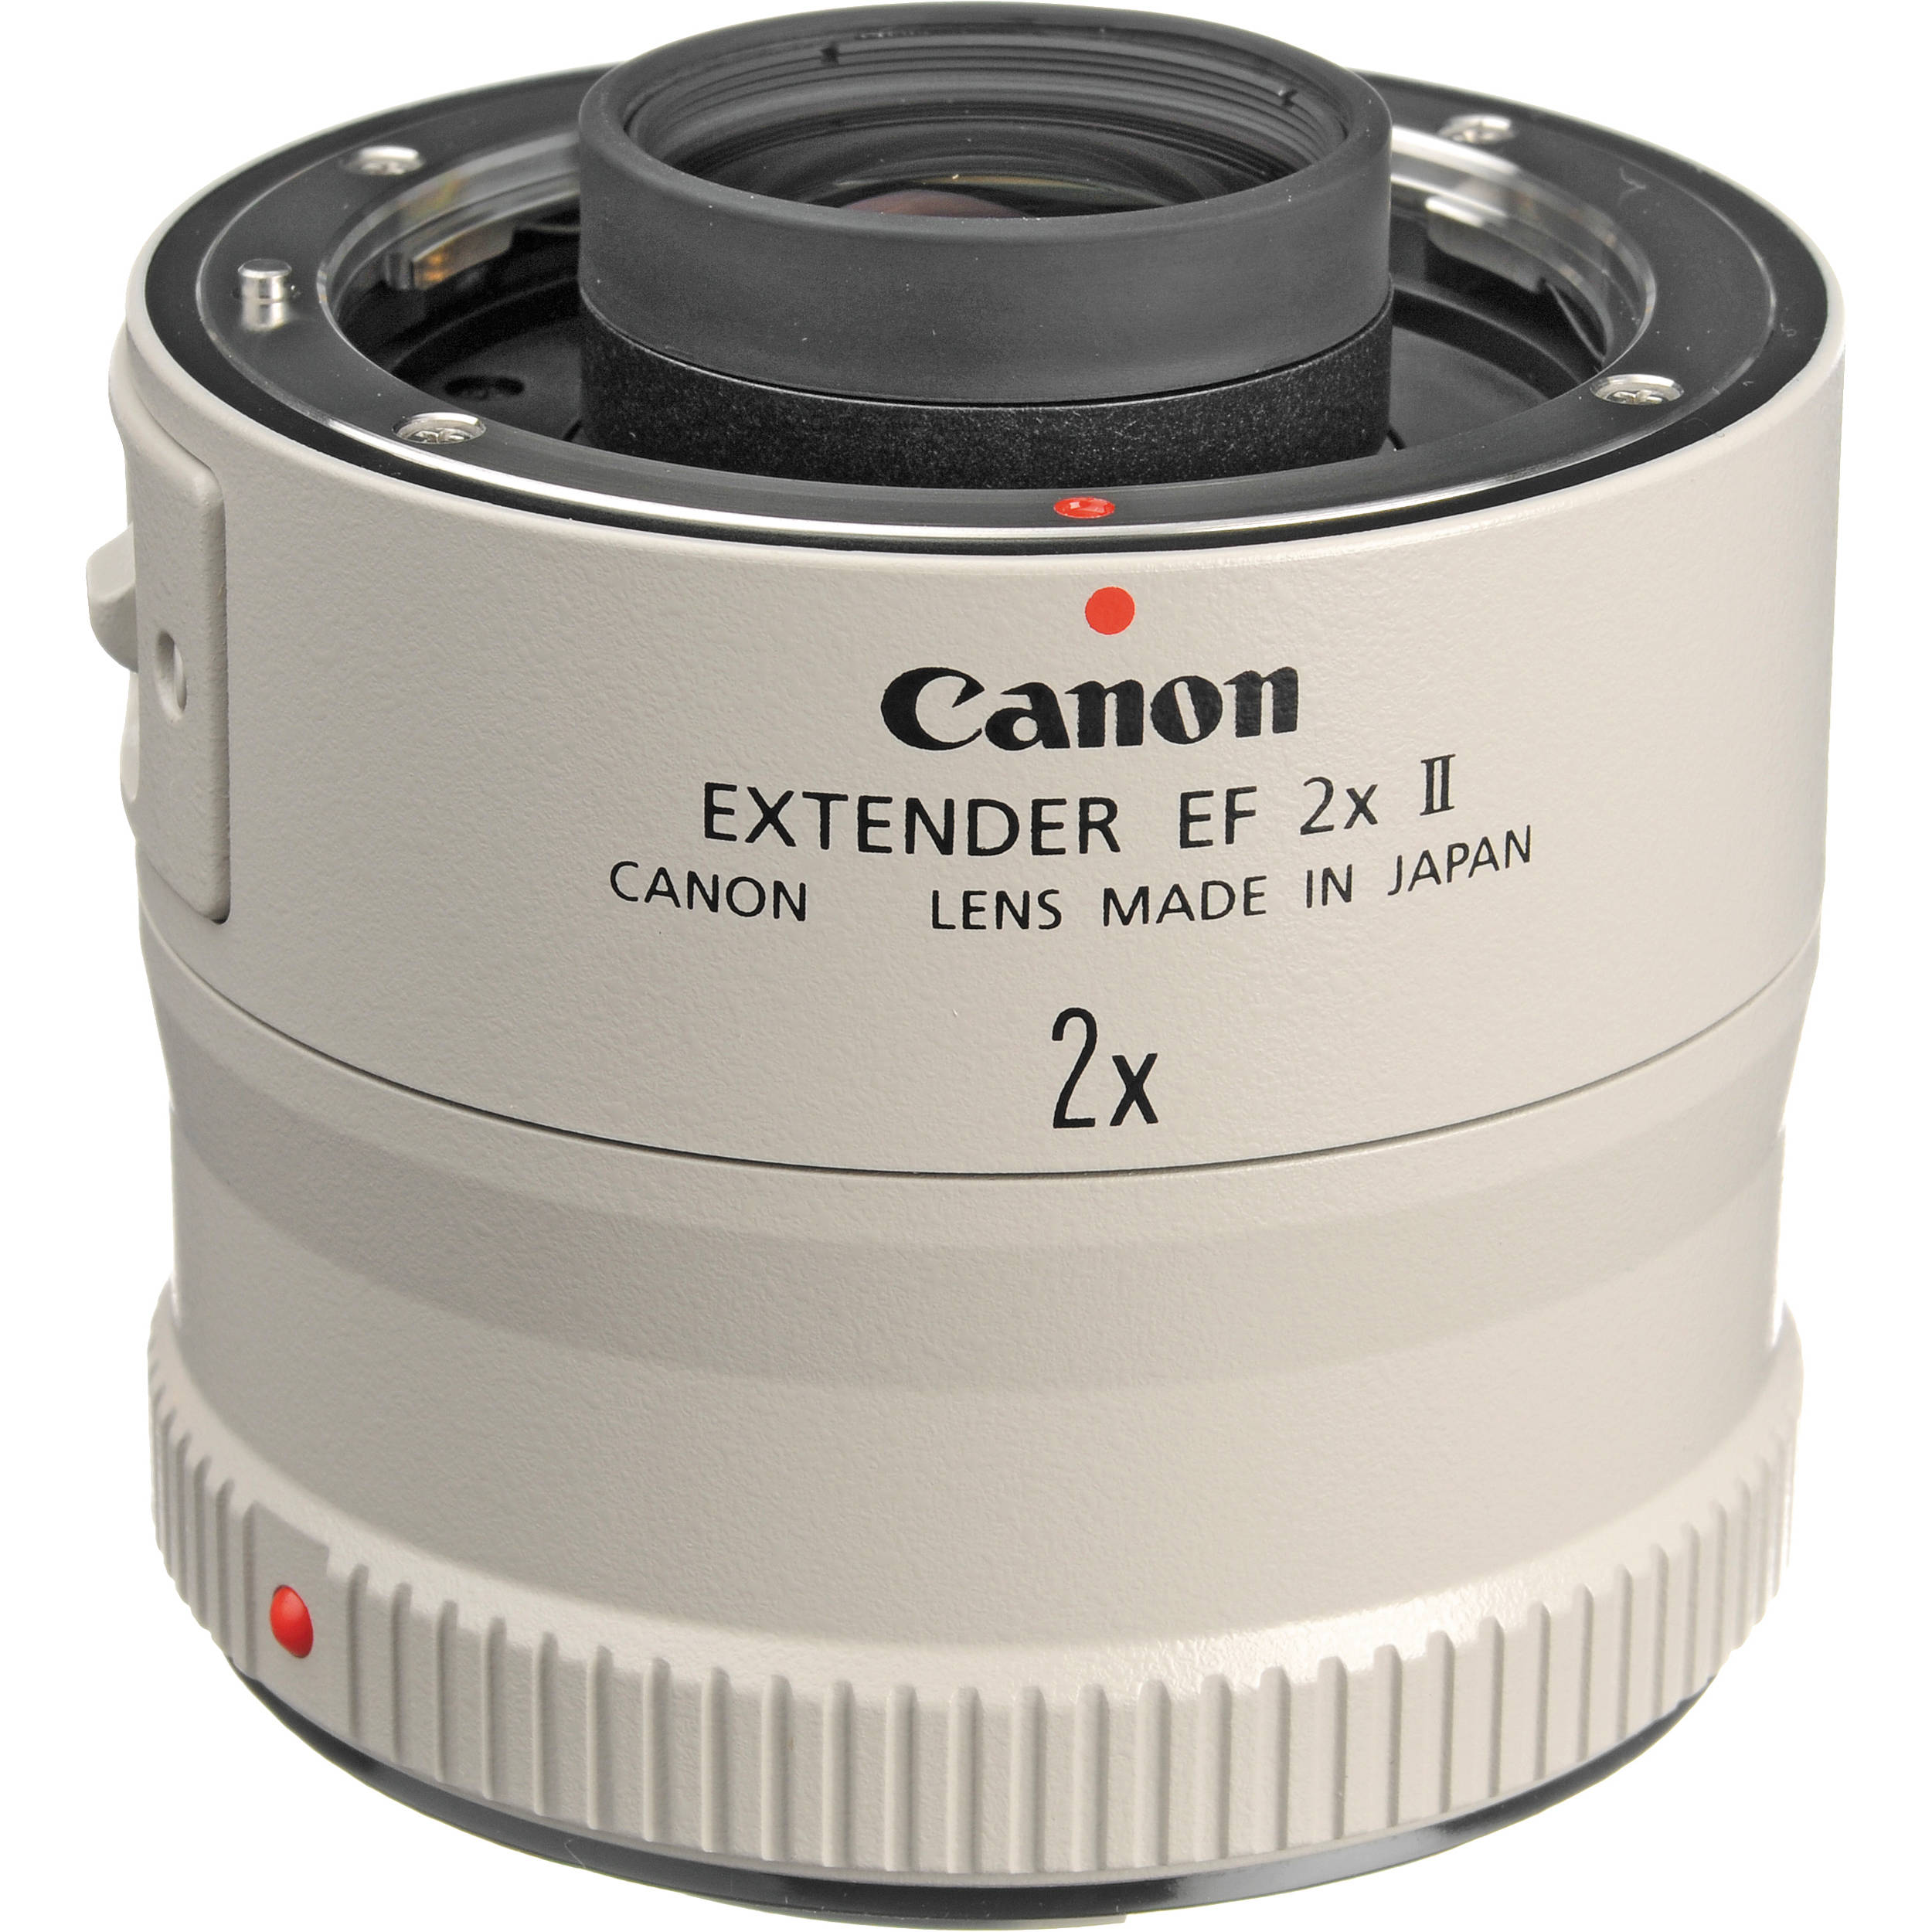 Canon 2x Extender Iii Compatibility Chart